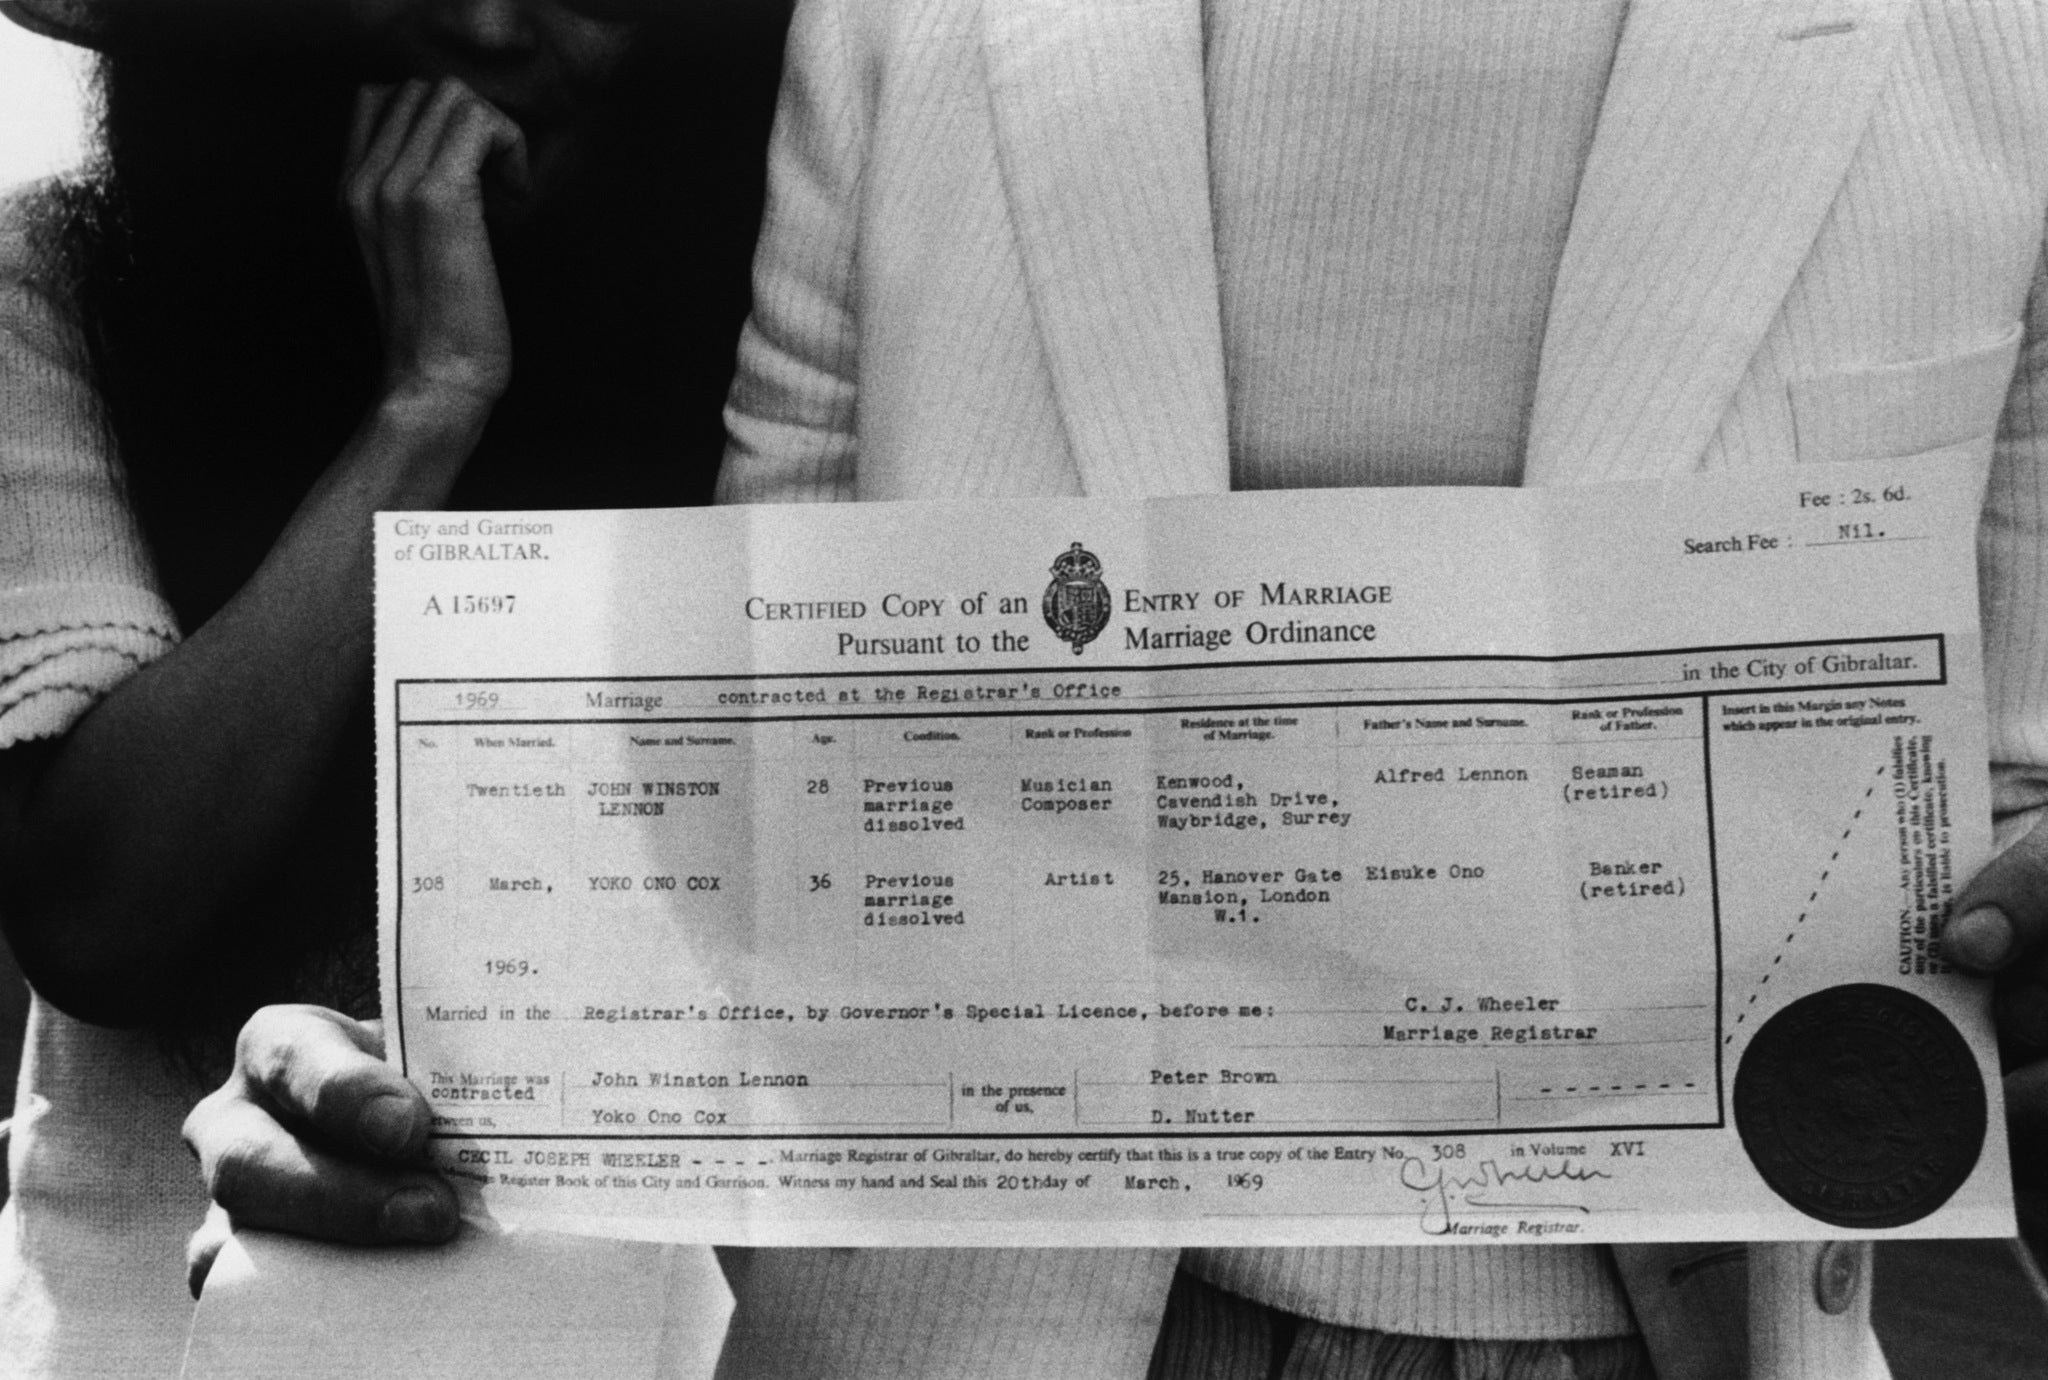 John Lennon and Yoko Ono with their marriage certificate after their wedding on 20th March 1969